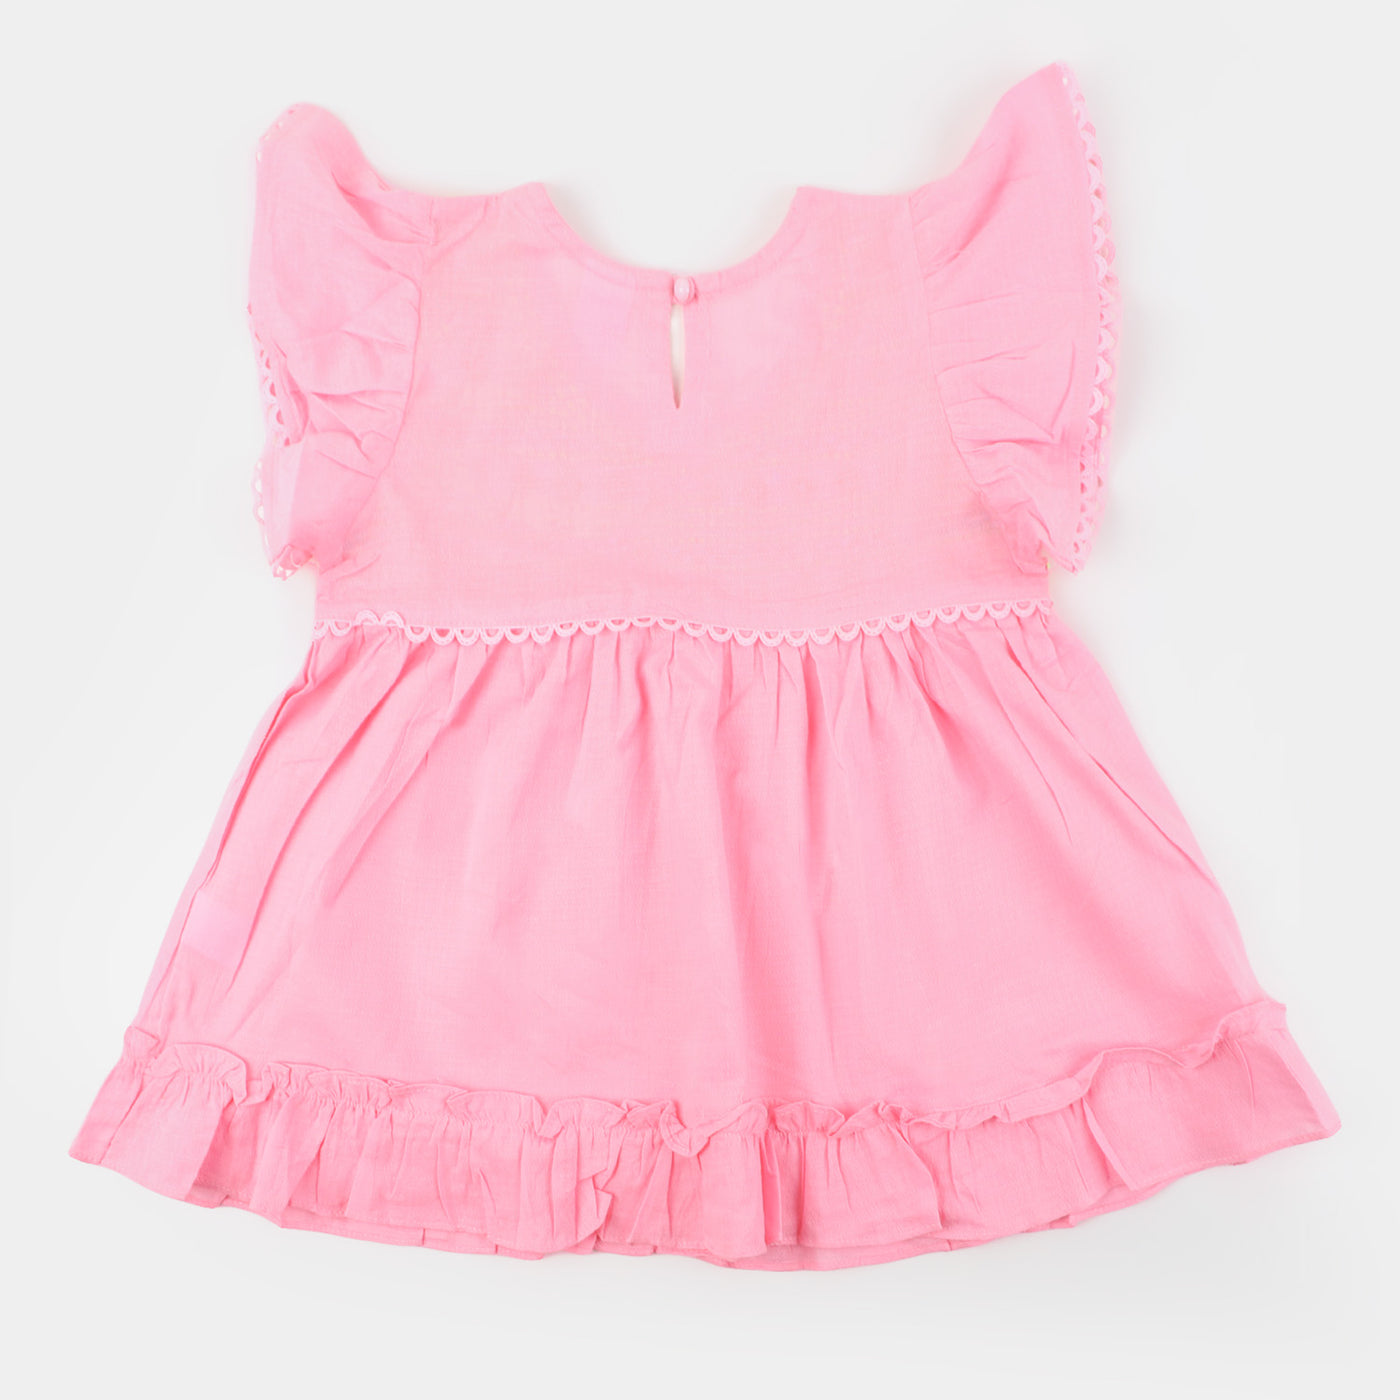 Girls Jacquard Embroidered Top Waves - Pink